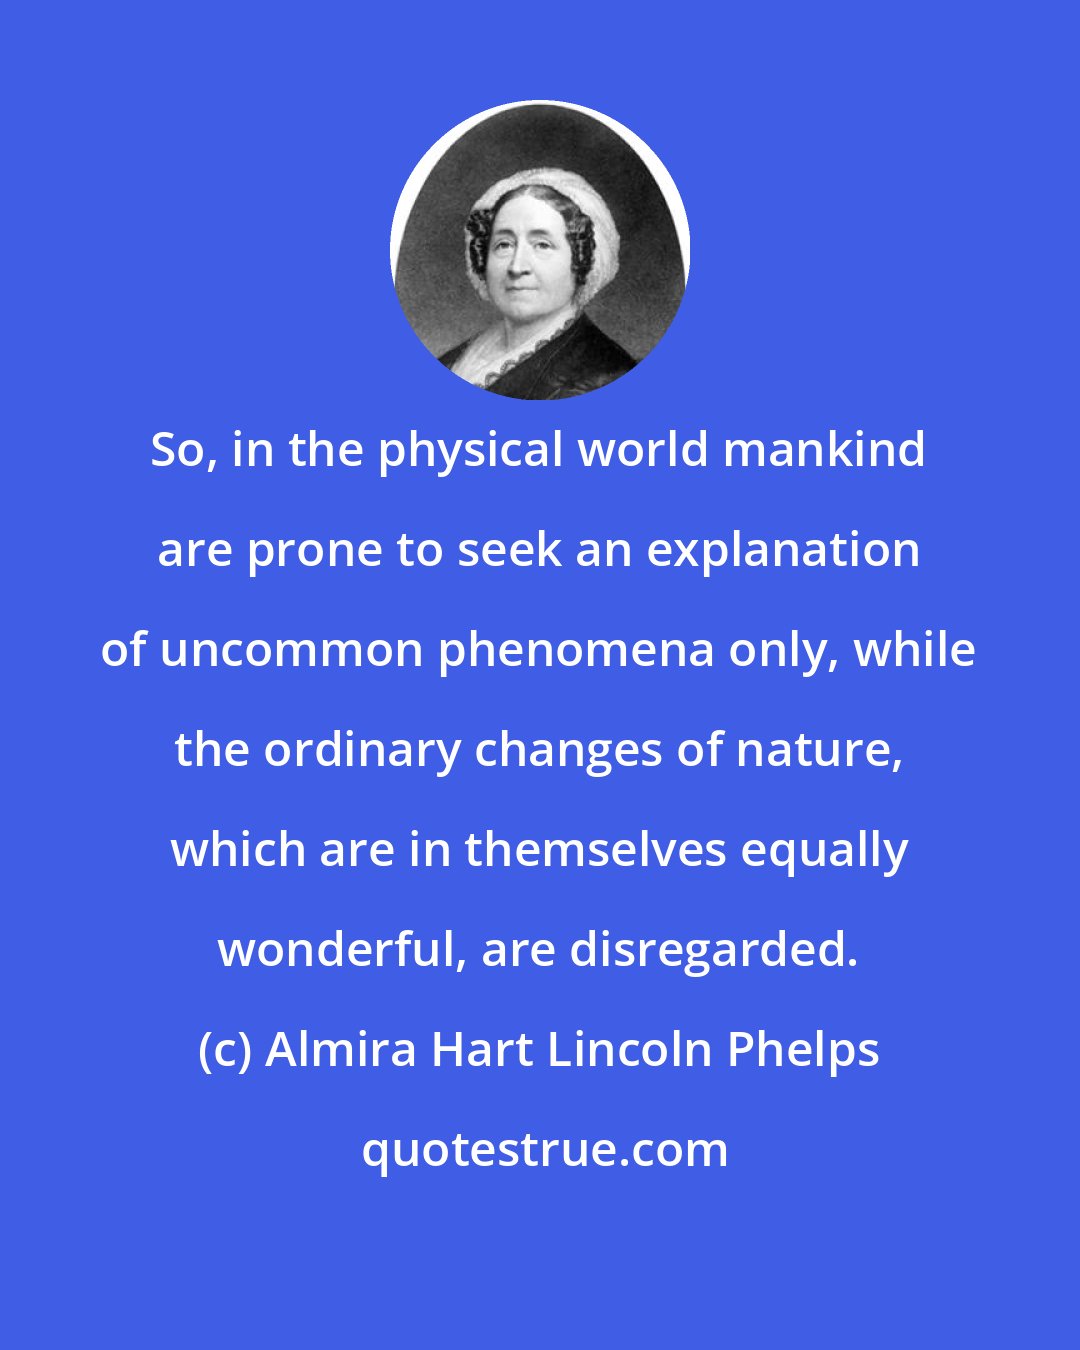 Almira Hart Lincoln Phelps: So, in the physical world mankind are prone to seek an explanation of uncommon phenomena only, while the ordinary changes of nature, which are in themselves equally wonderful, are disregarded.